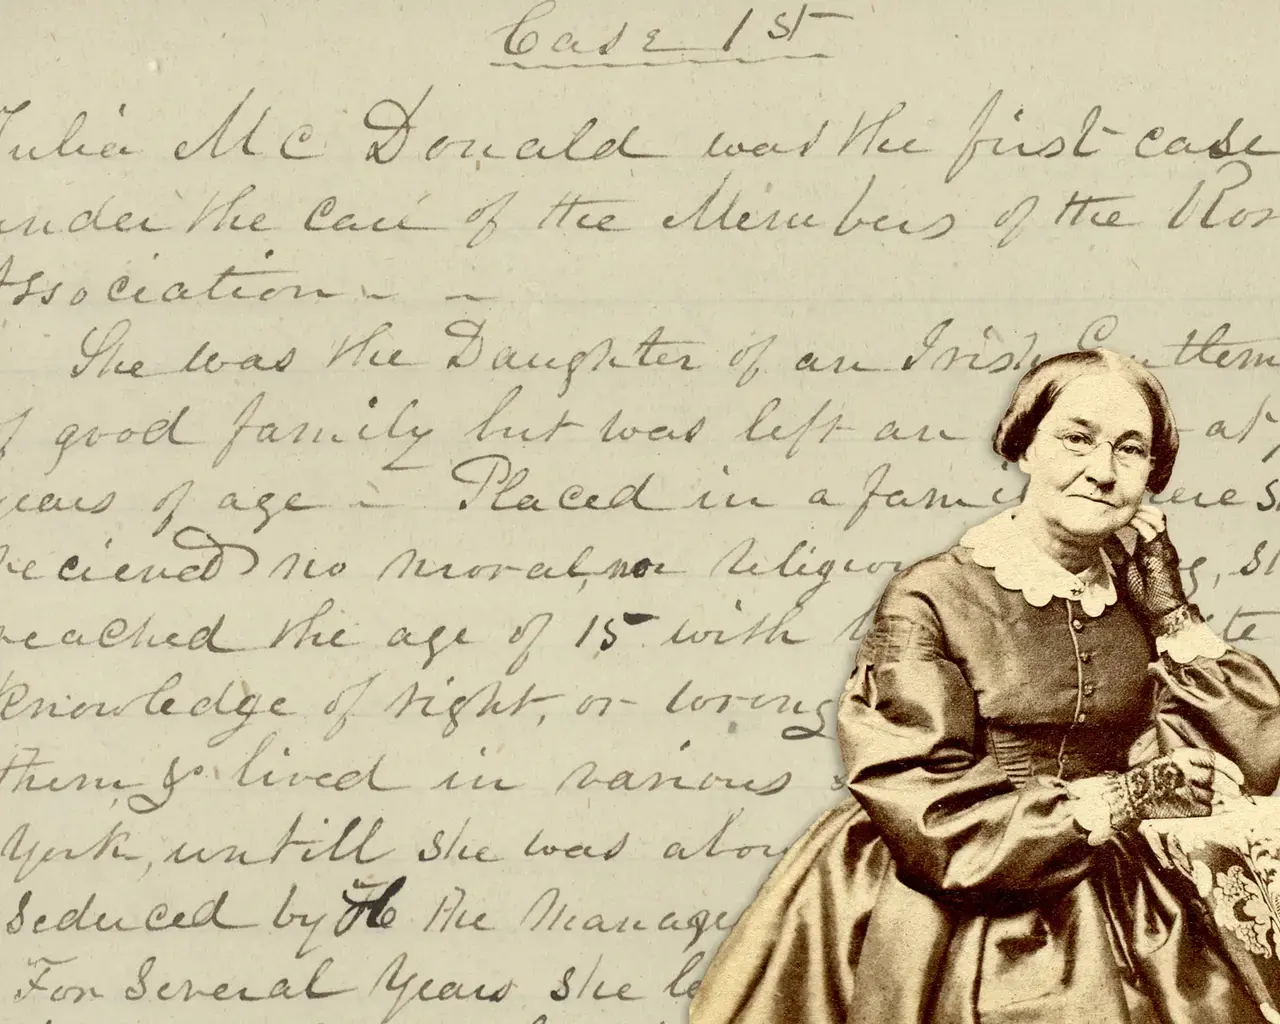 Susan Dreher, composite photograph of Mira Sharpless Townsend over her papers. Courtesy of the Friends Historical Library of Swarthmore College.